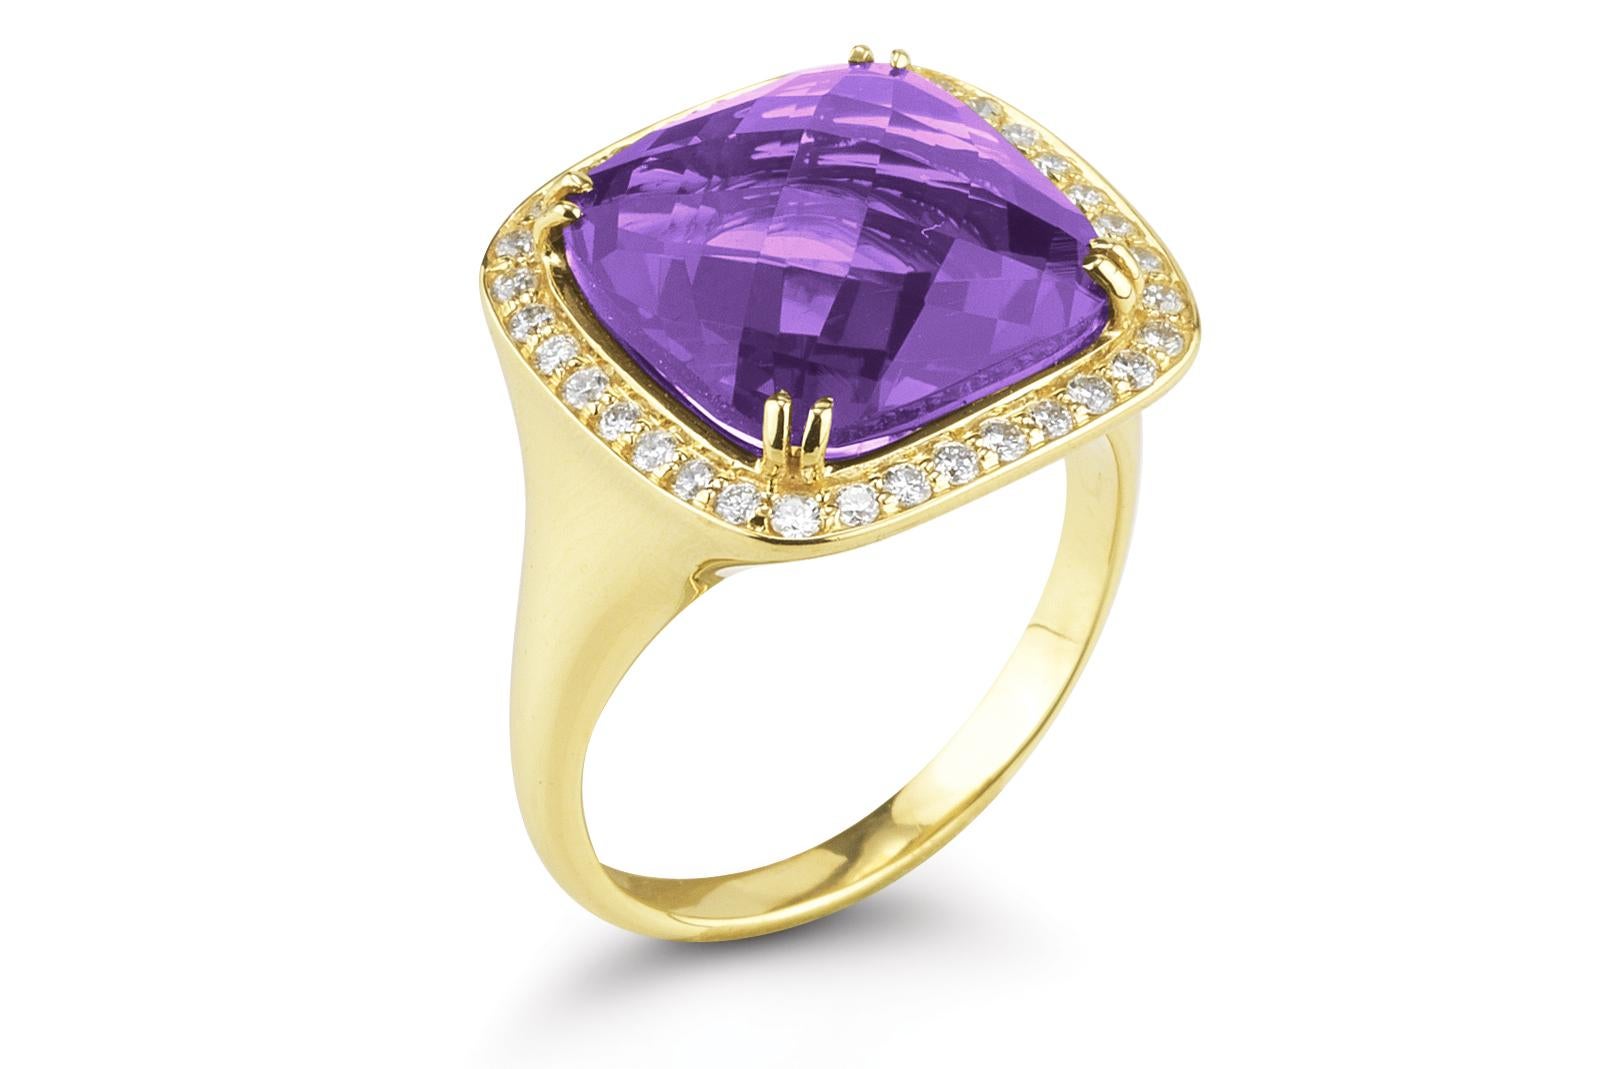 For Sale:  Hand-Crafted 14K Yellow Gold Cocktail Ring Set with an Amethyst Color Stone 4